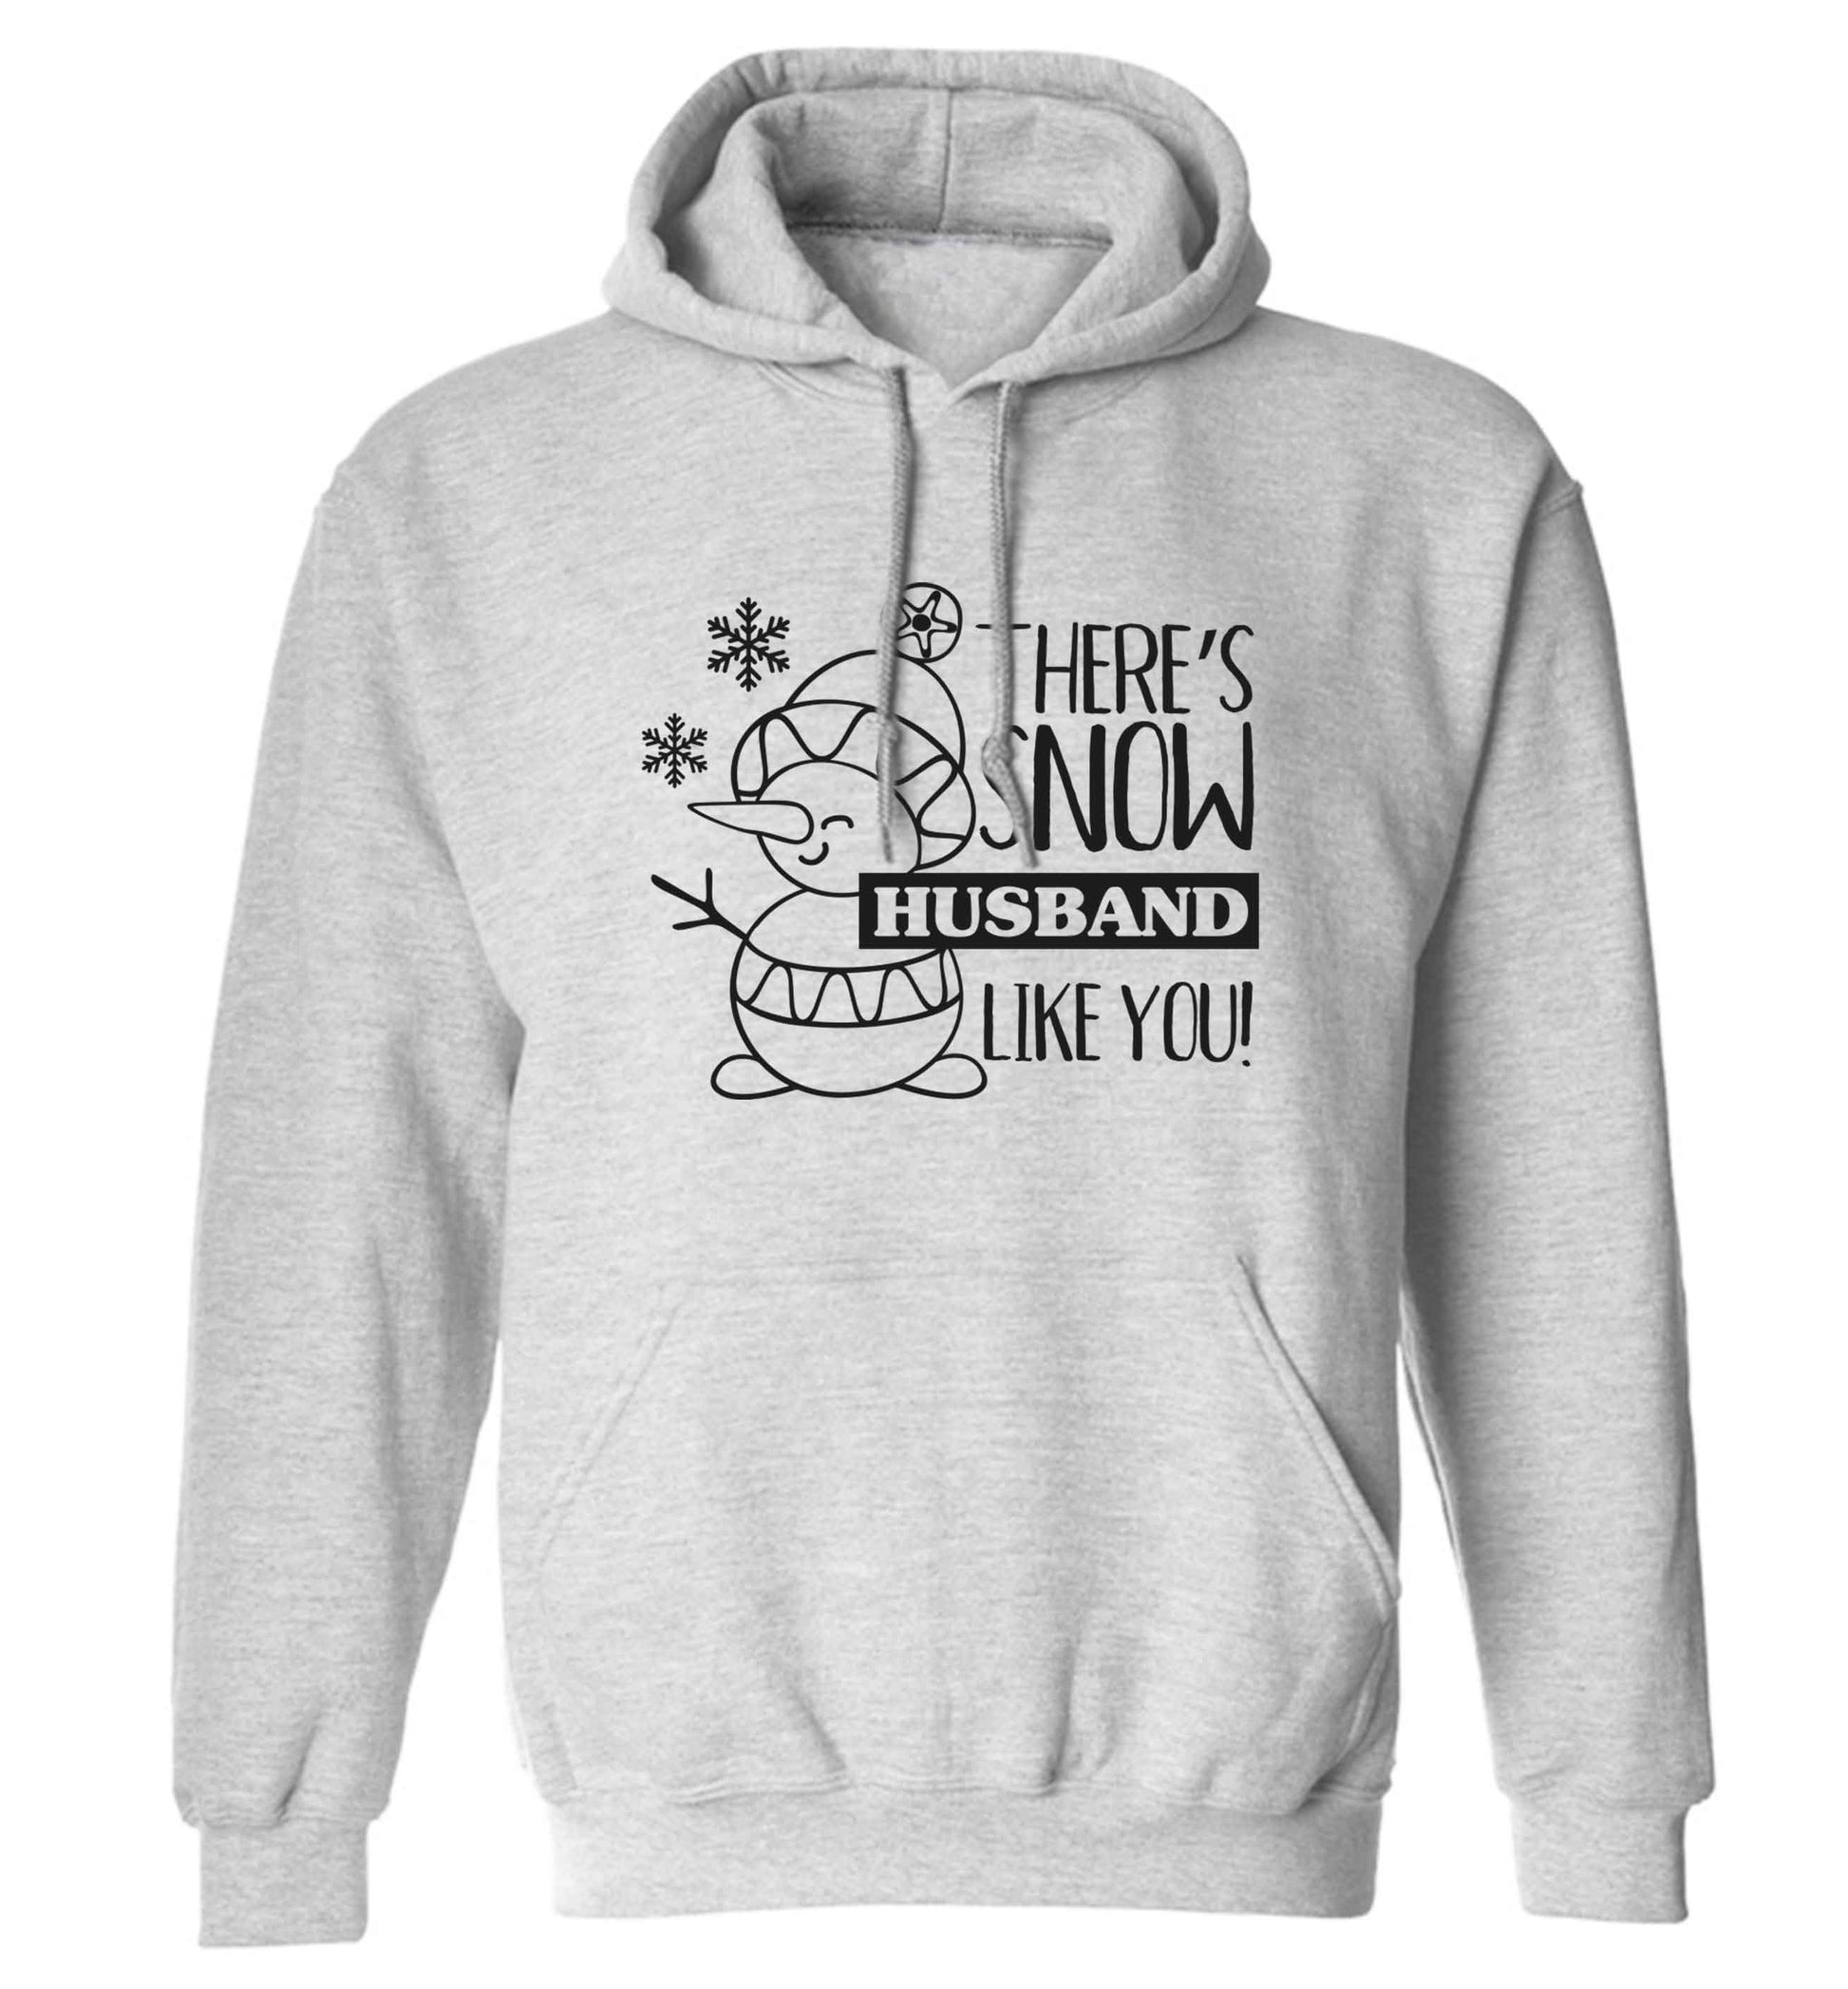 There's snow husband like you adults unisex grey hoodie 2XL